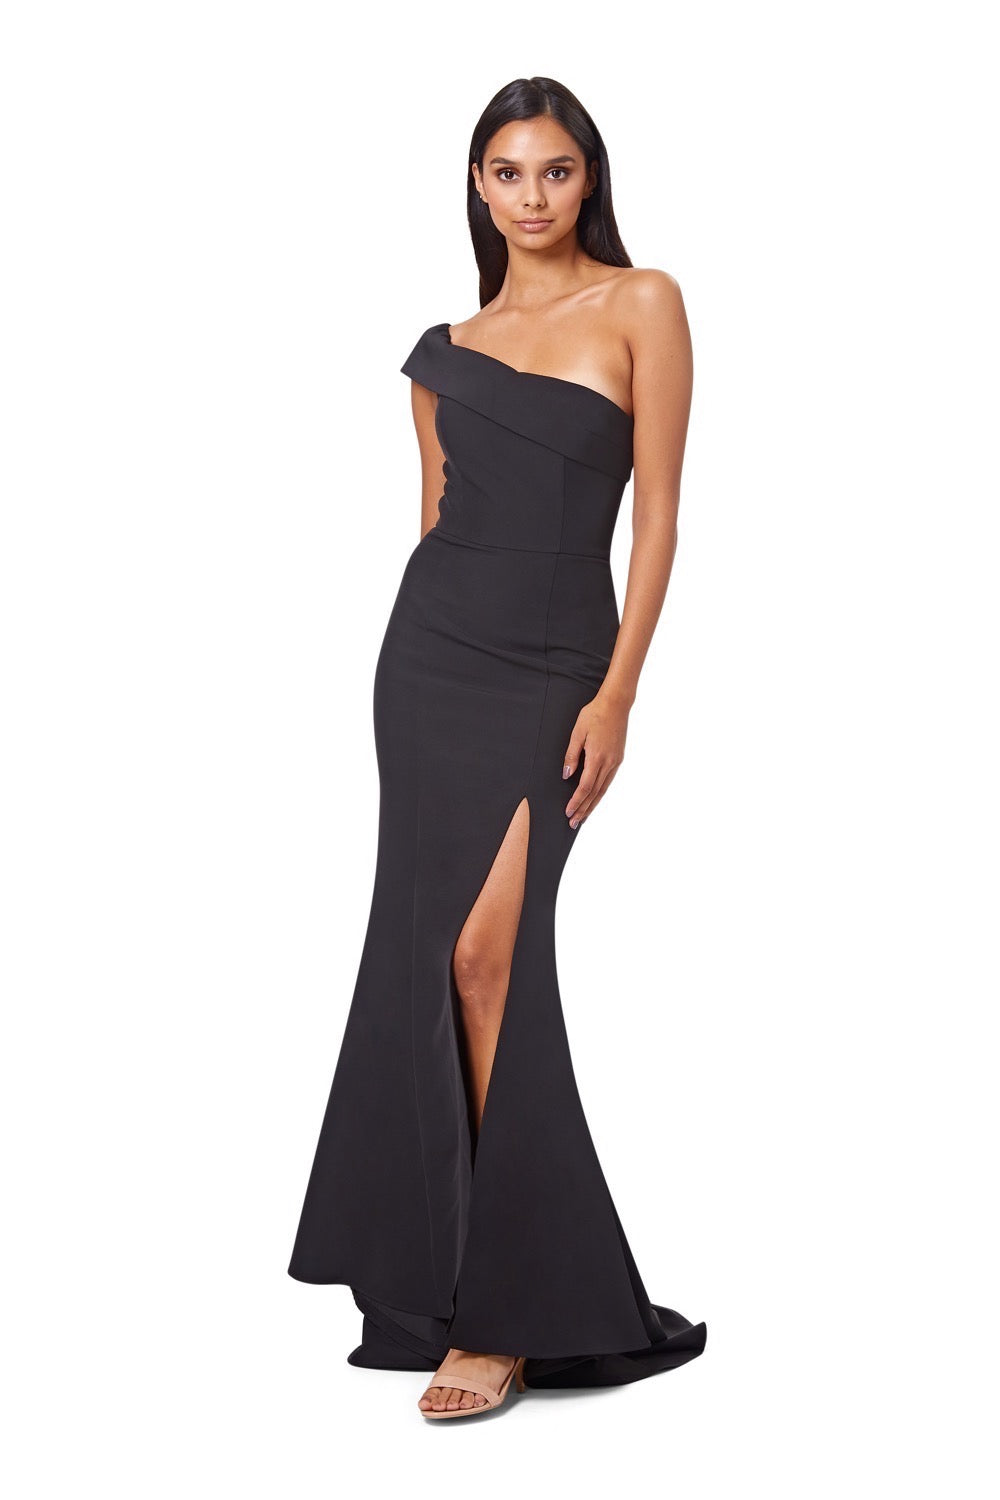 Jarlo's Sheridan One Shoulder Maxi Dress with Thigh High Slit in Black ...